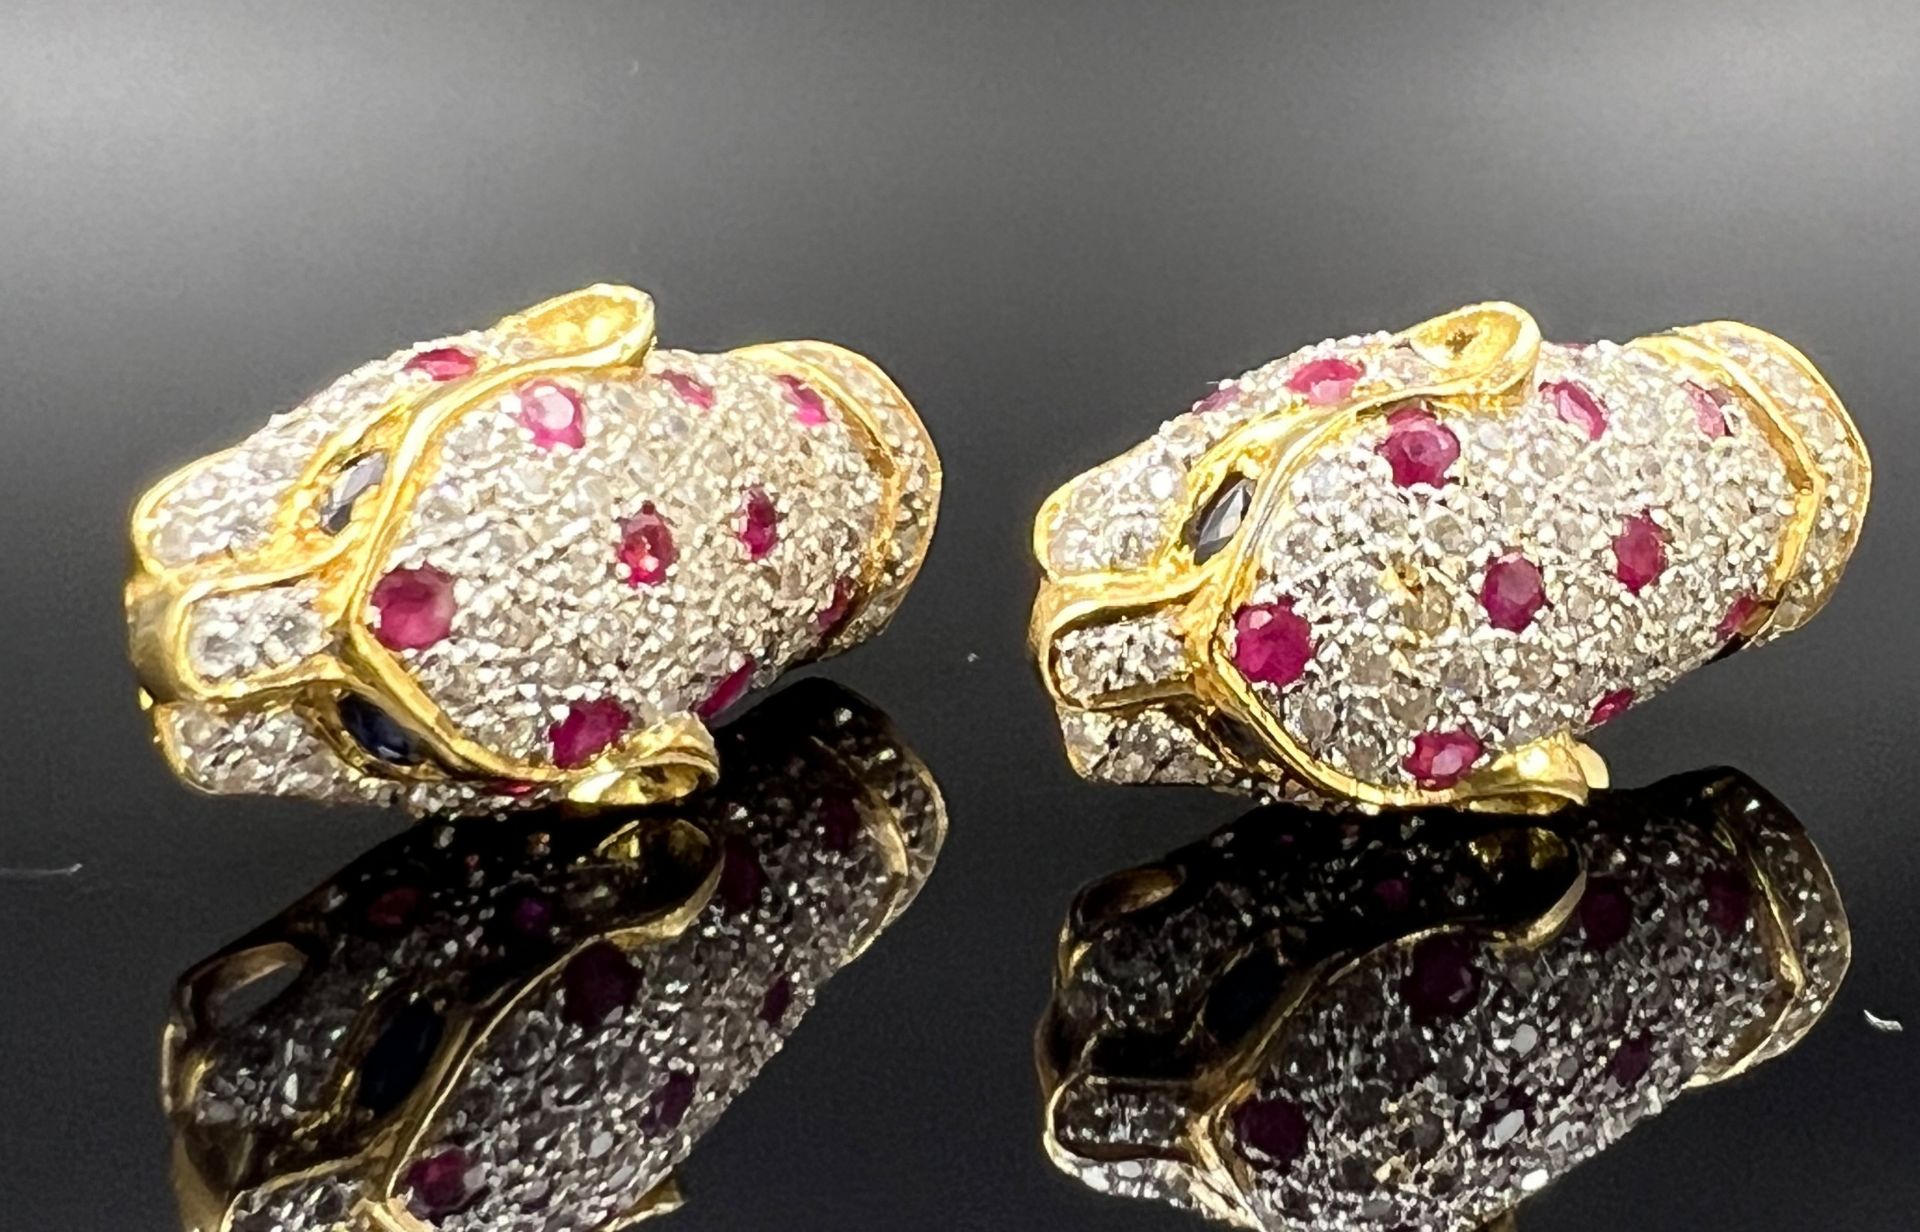 Pair of "Cheetah" stud earrings. 750 yellow gold and white gold with gemstone setting. - Image 2 of 8